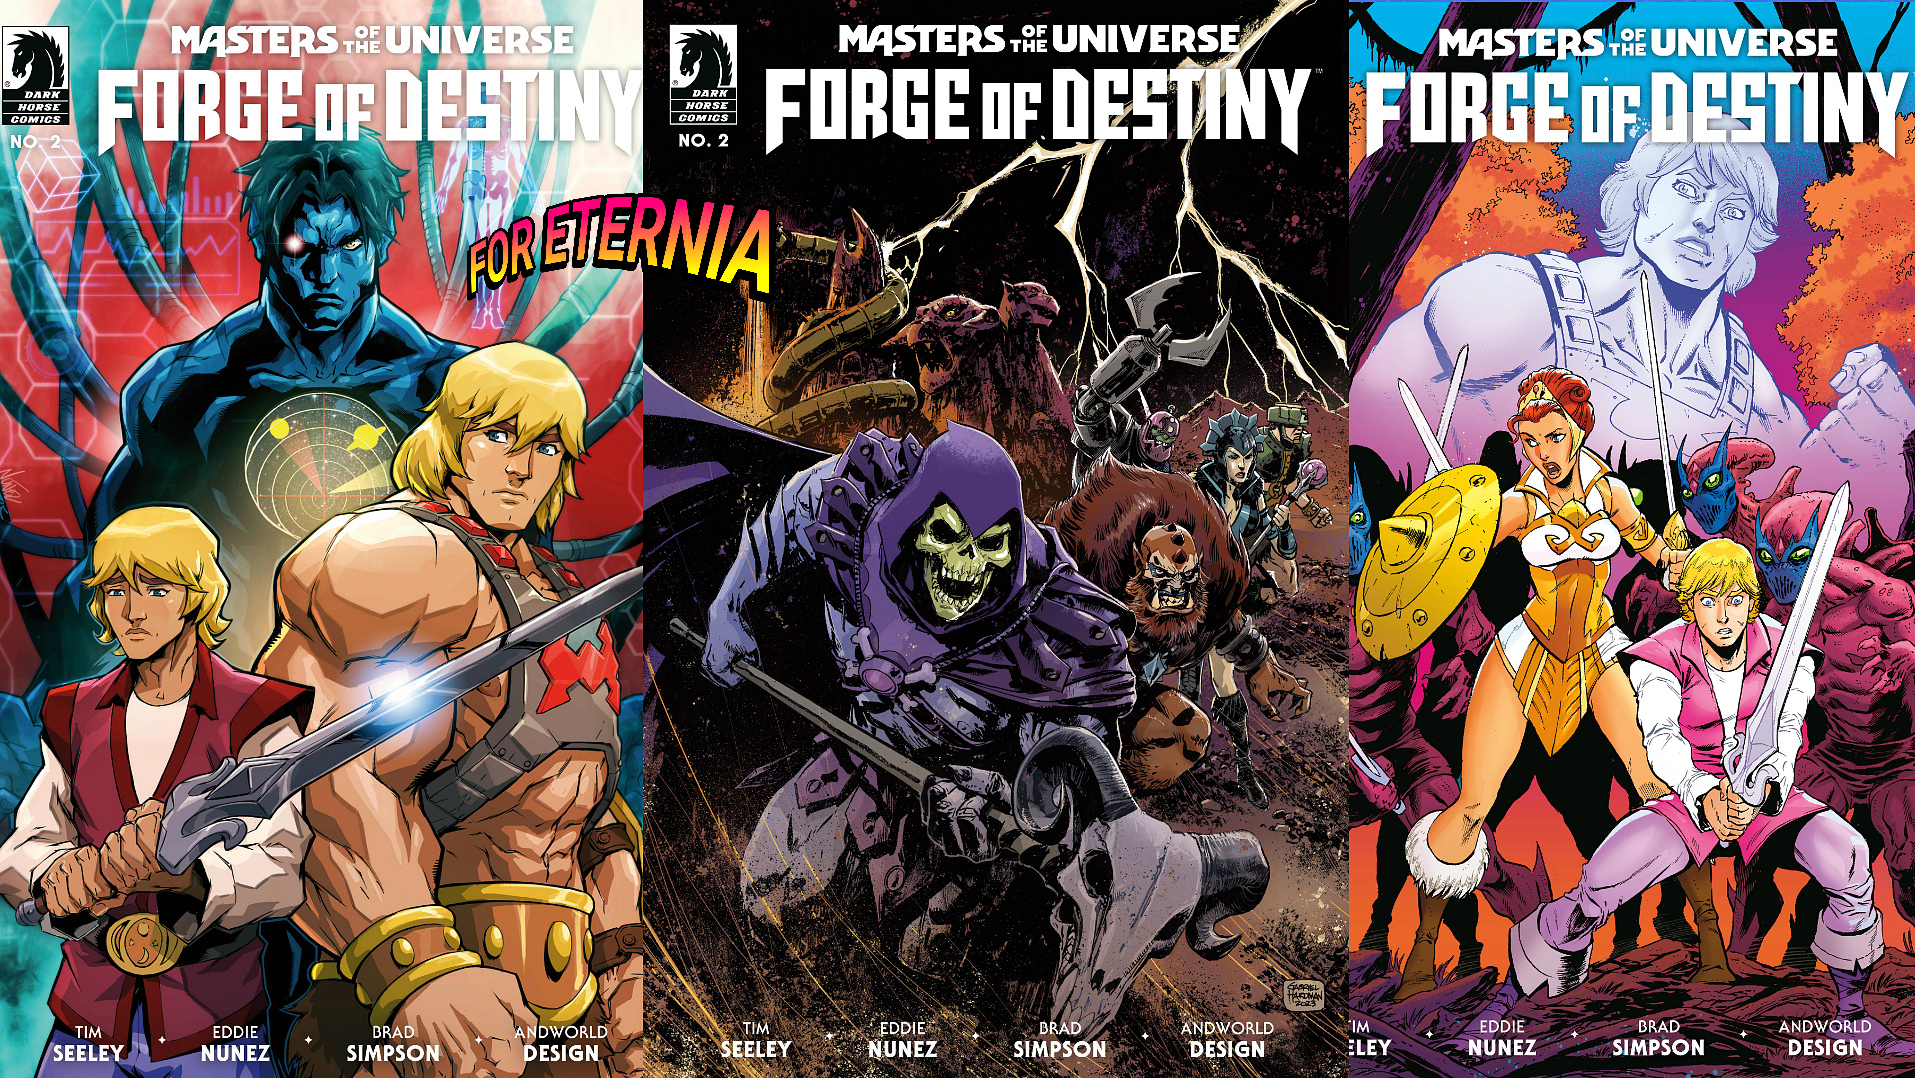 Dark Horse Comics FORGE OF DESTINY Issue #2 is out today!